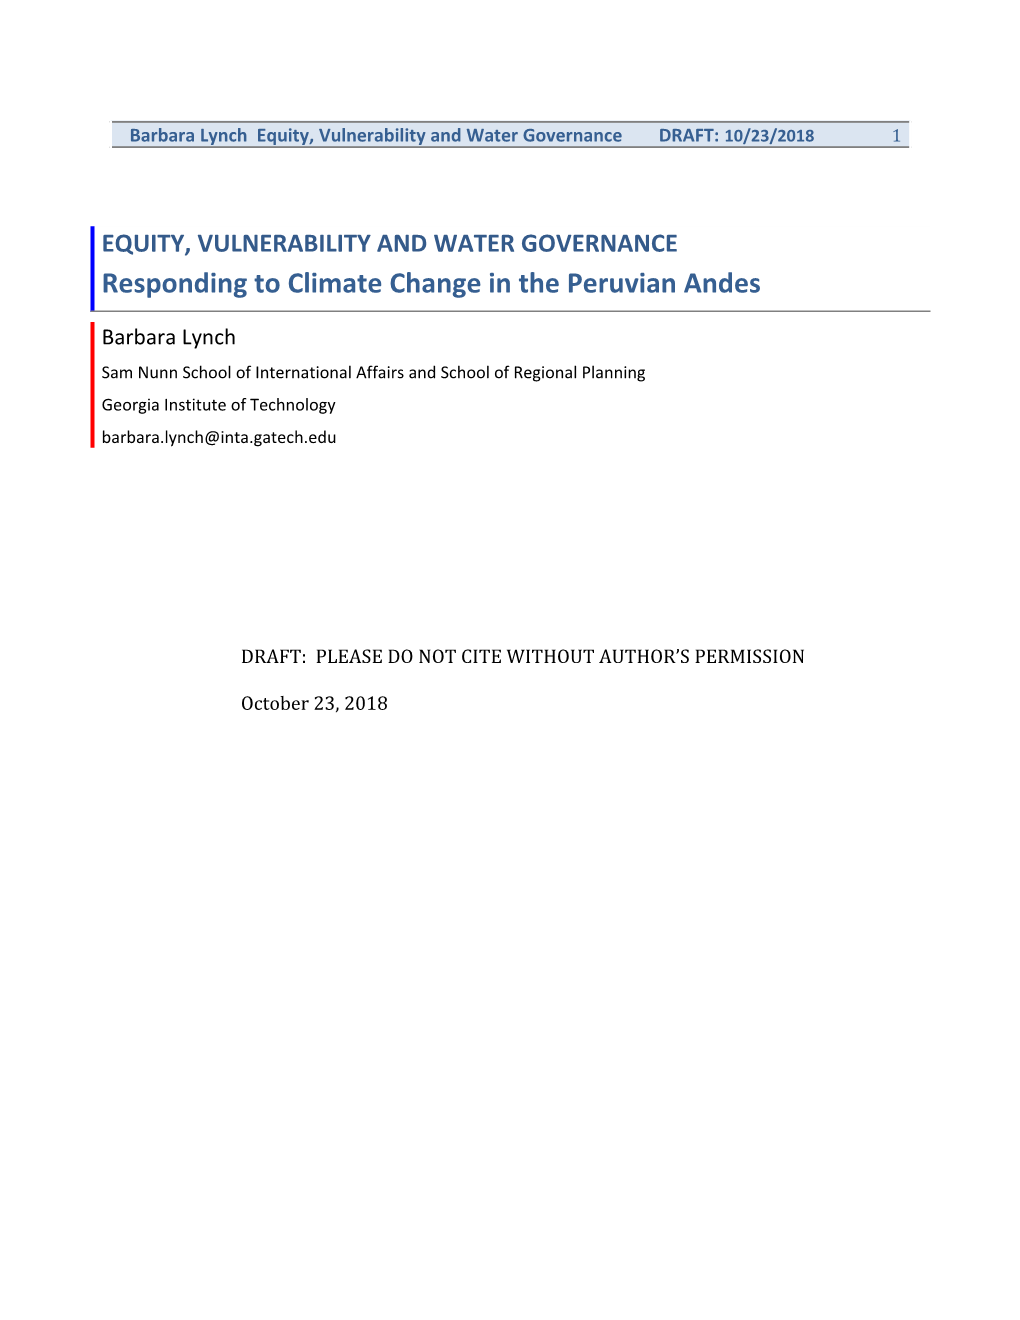 Equity, Vulnerability and Water Governance